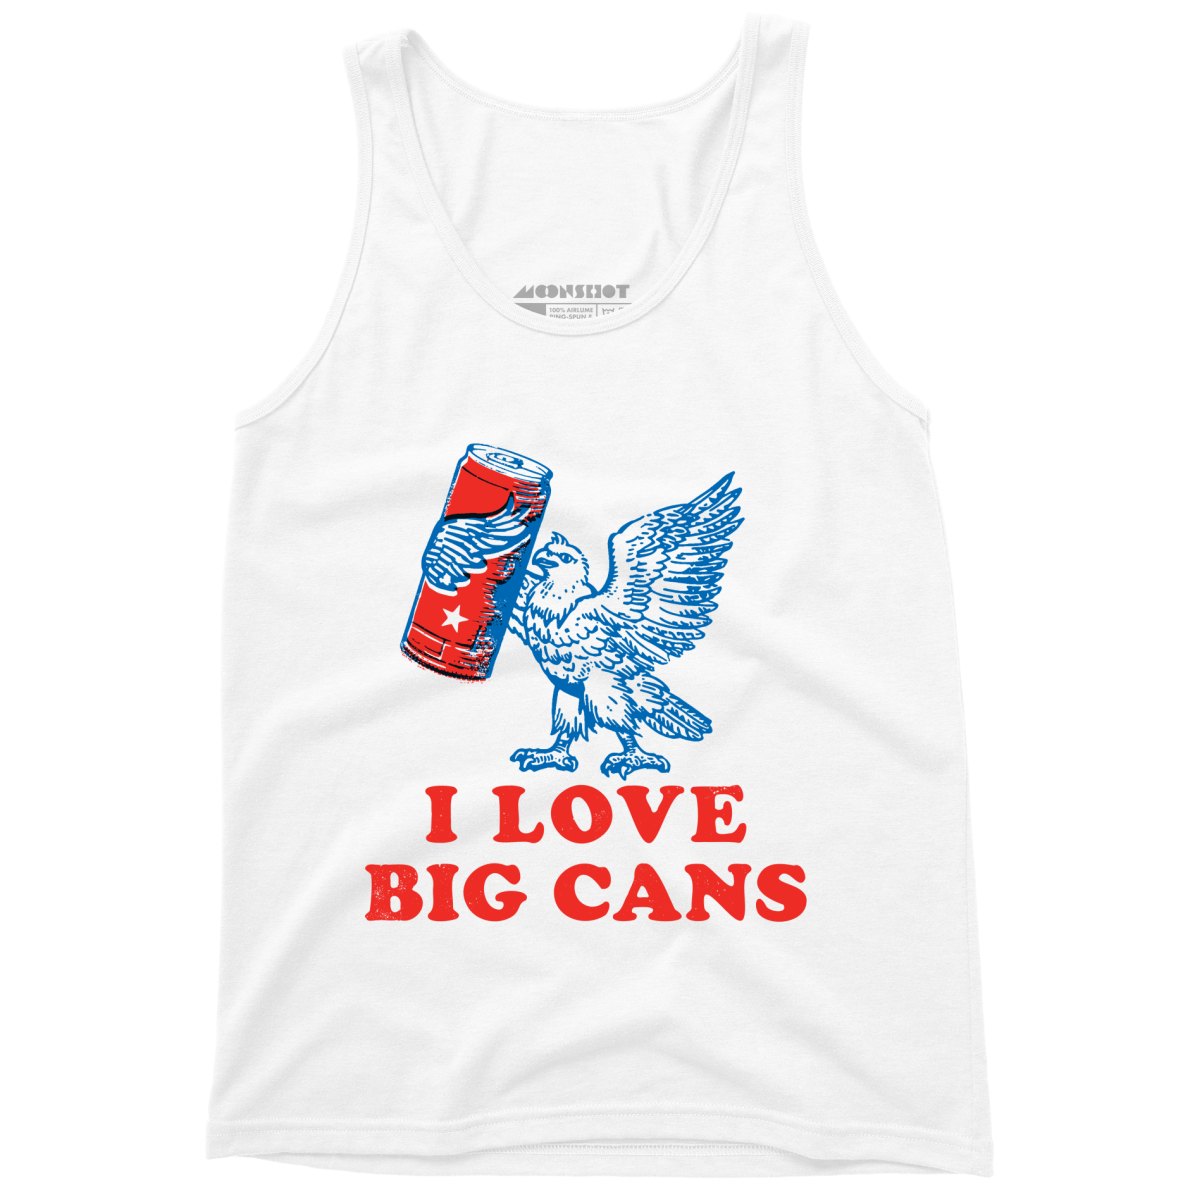 I Love Big Cans - Unisex Tank Top